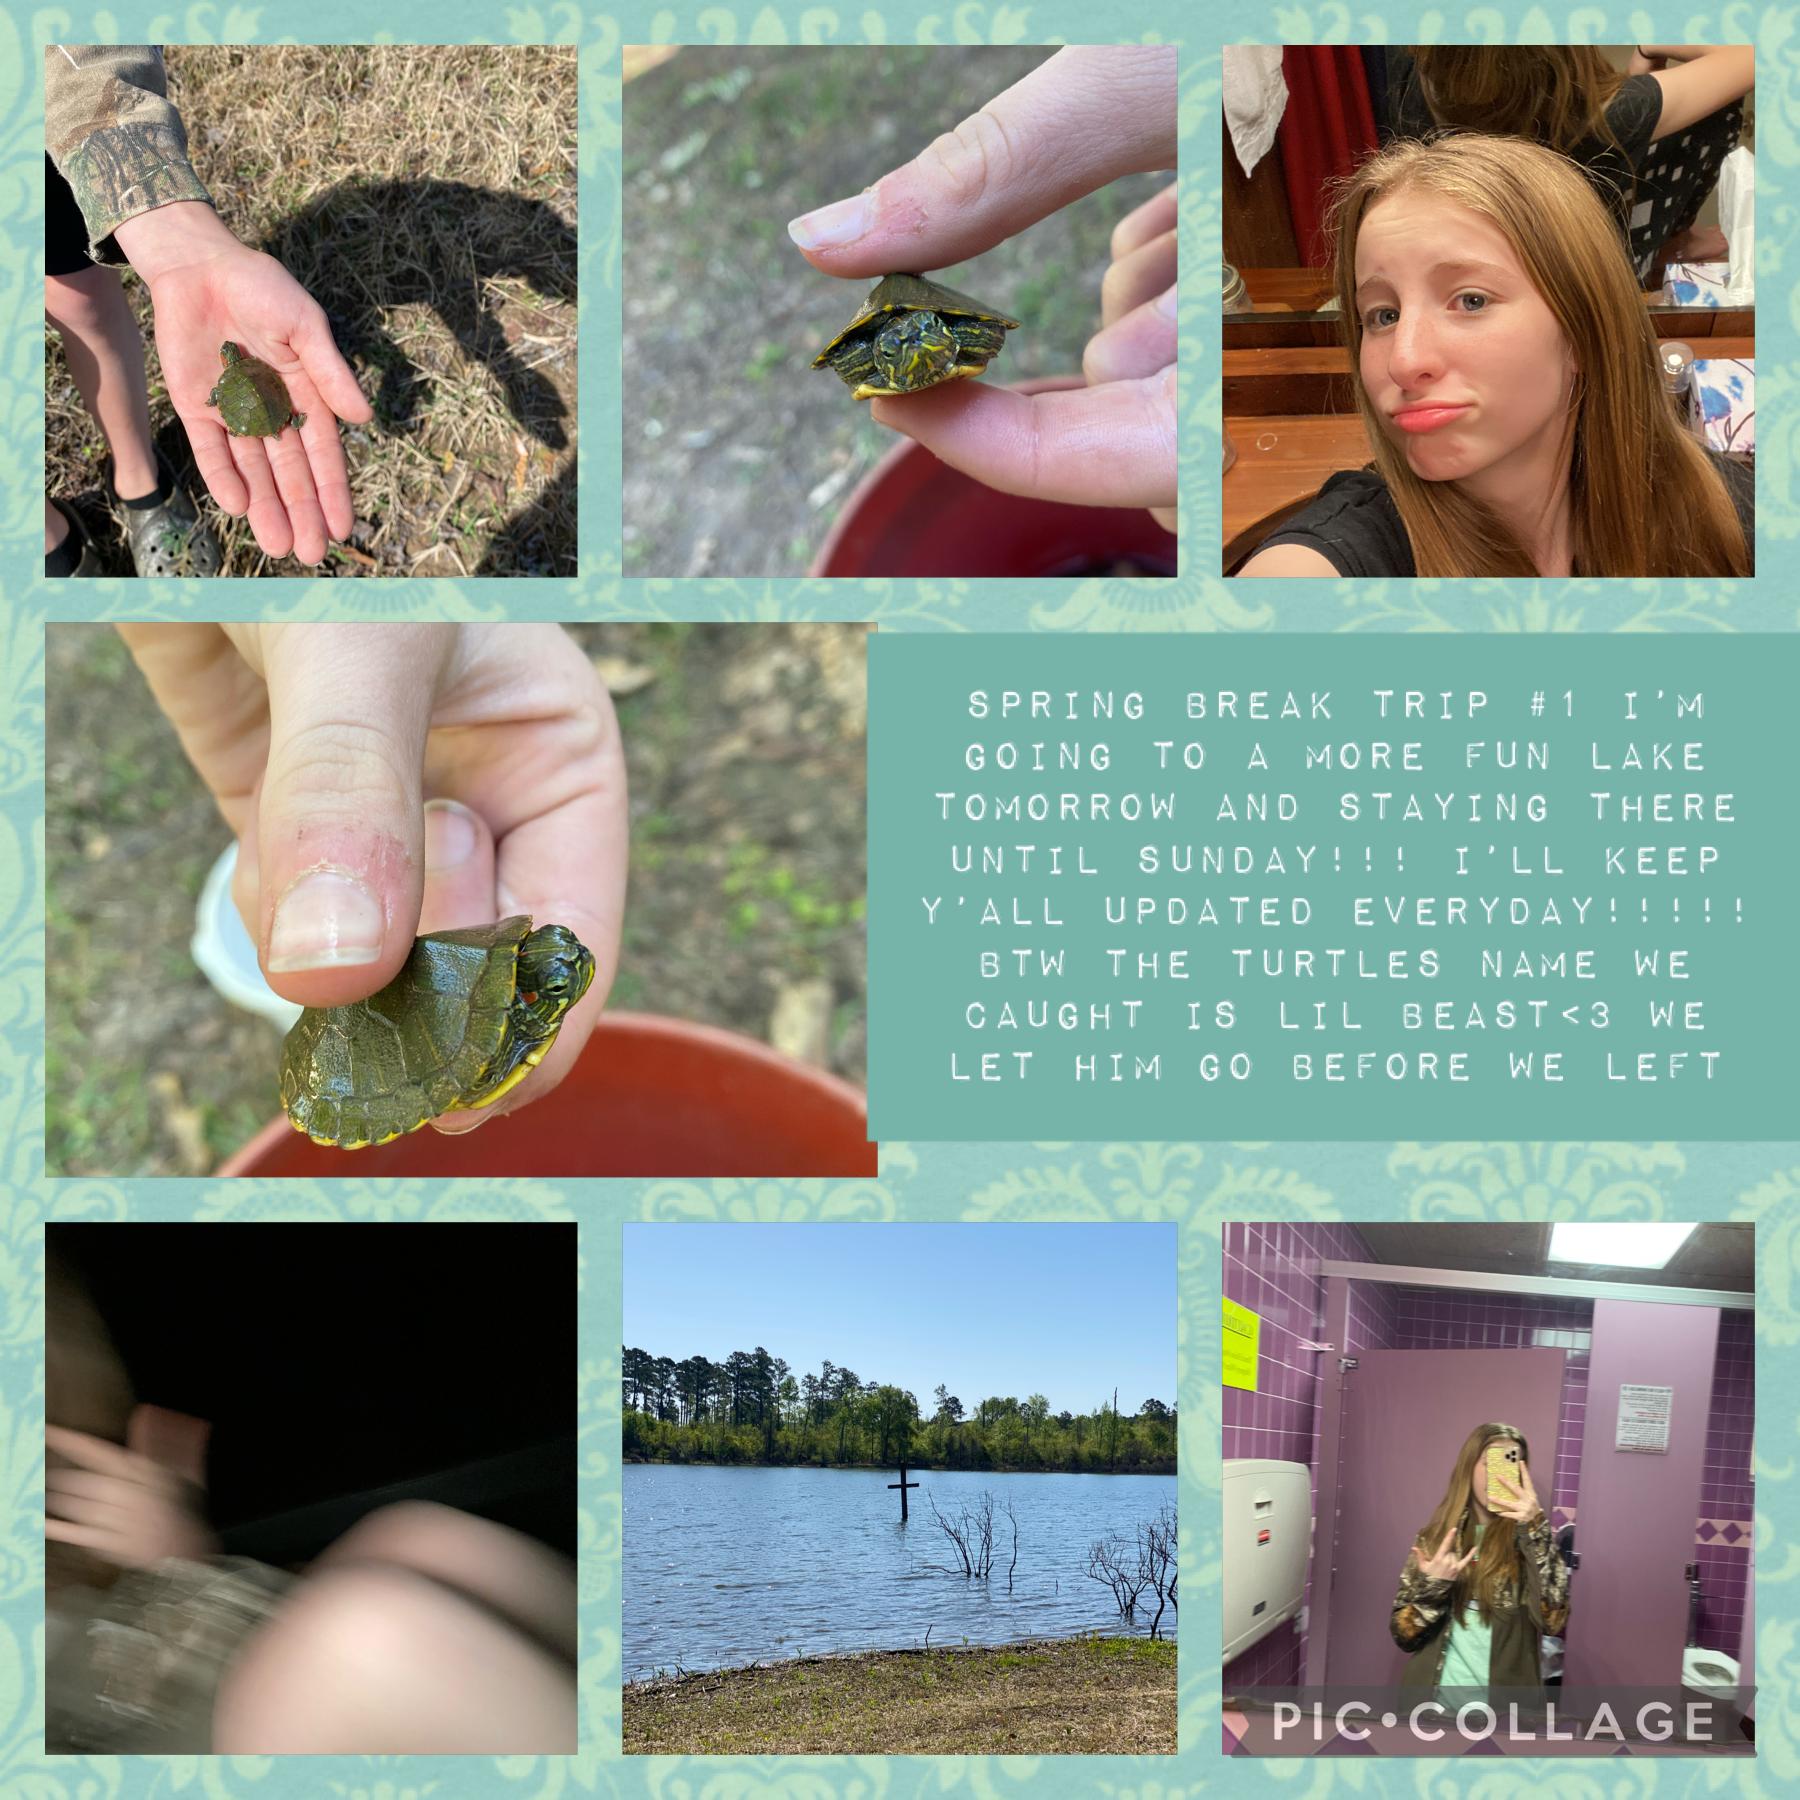 Spring break trip #1 I’m going to a more fun lake tomorrow and staying there until Sunday!!! I’ll keep y’all updated everyday!!!!! Btw the turtles name we caught is lil beast<3 we let him go before we left